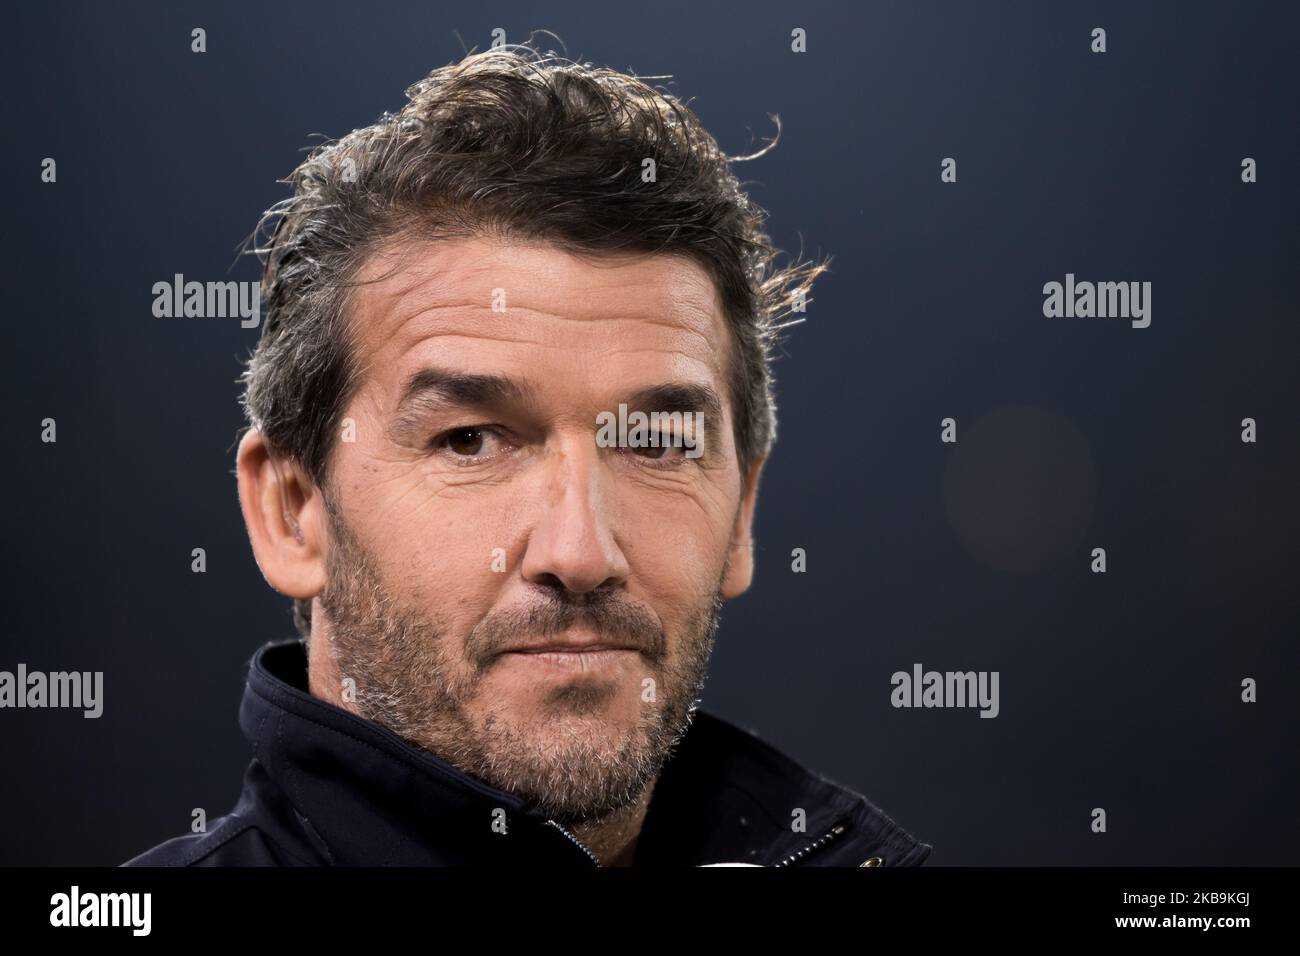 TV-Expert, Karl-Heinz Riedle, prior to the DFB Cup second round match between Borussia Dortmund and Borussia Mönchengladbach at the Signal Iduna Park on October 30, 2019 in Dortmund, Germany. (Photo by Peter Niedung/NurPhoto) Stock Photo